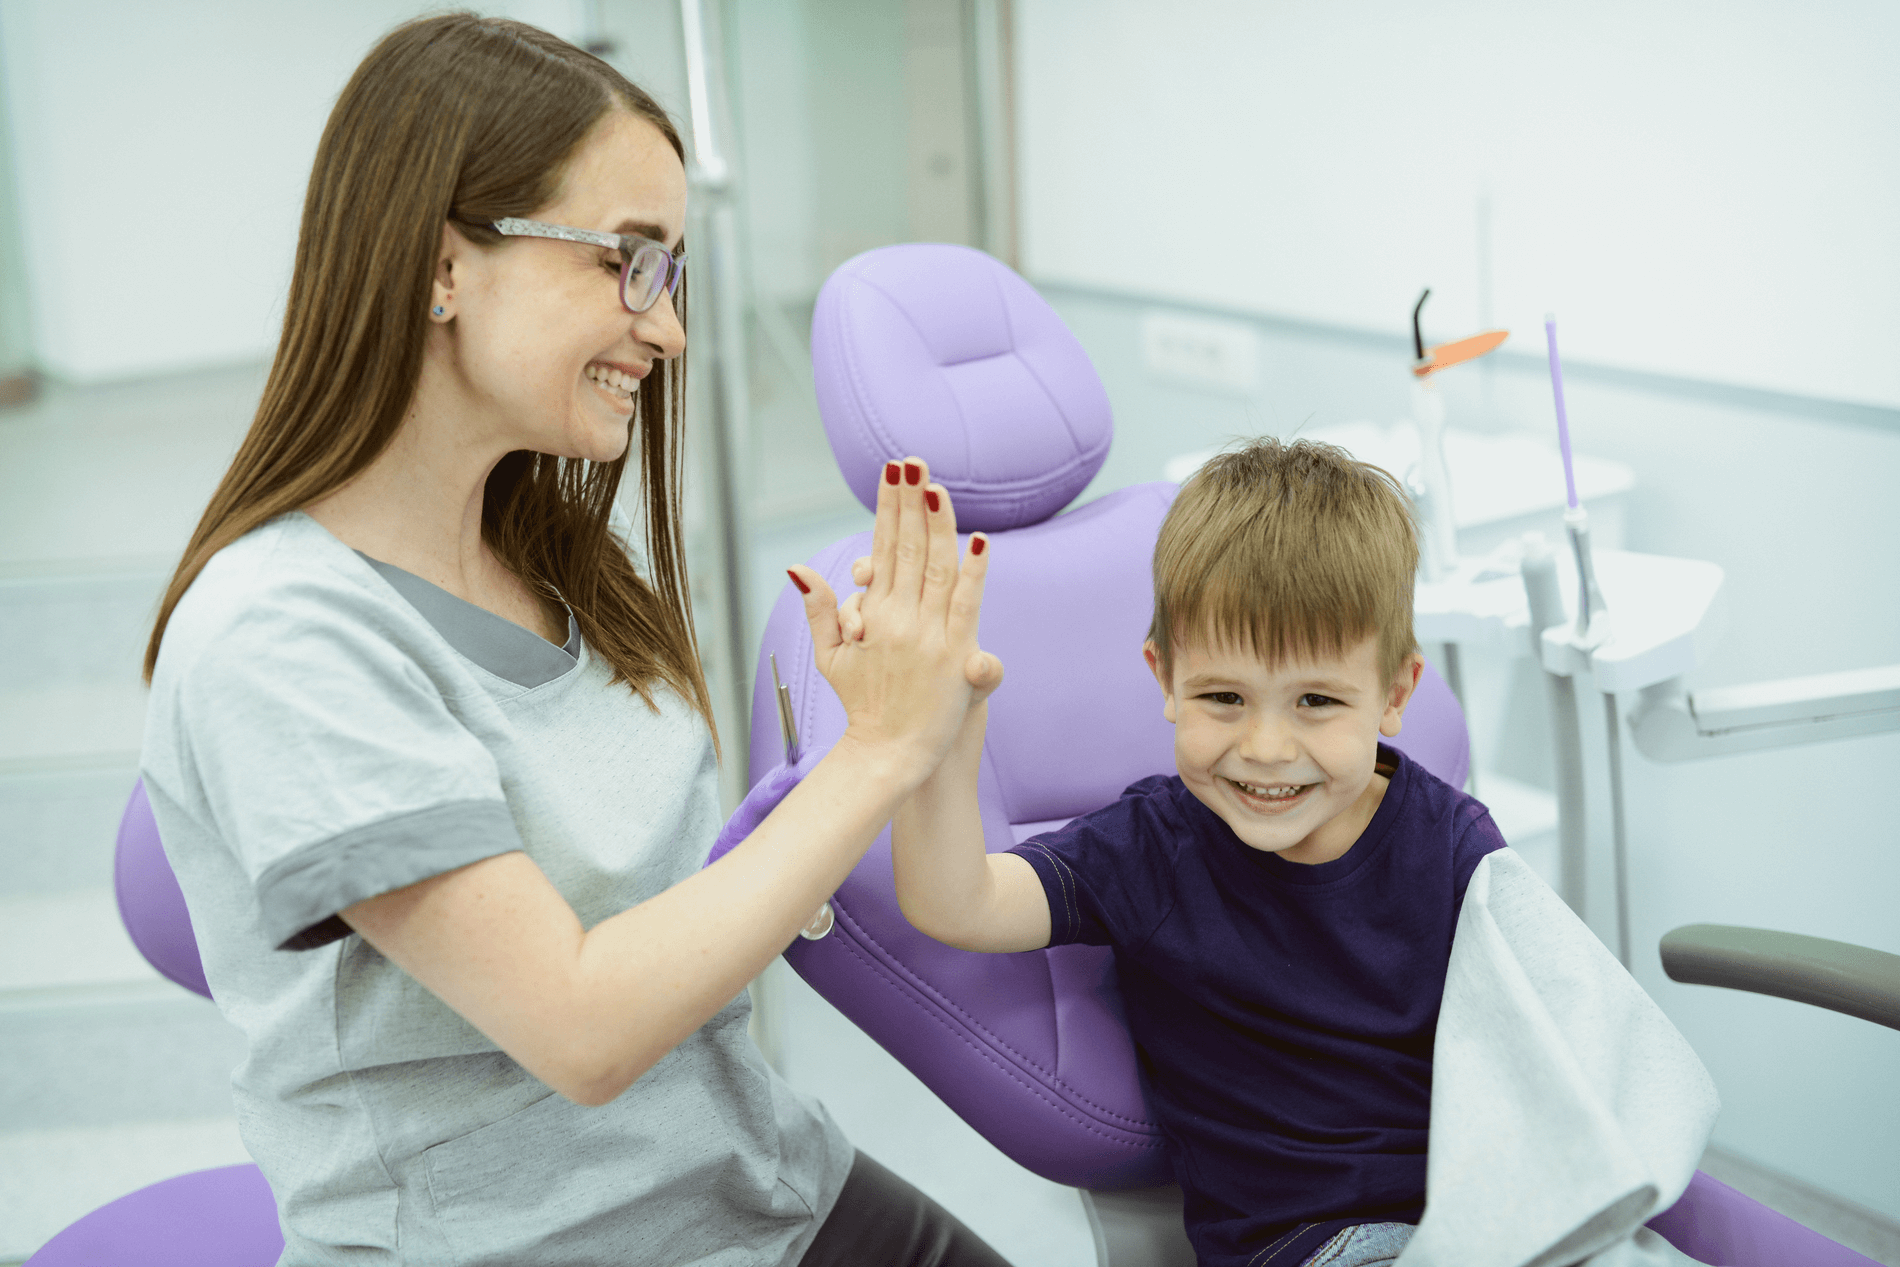 Bringing Your Child to Their First Dental Visit